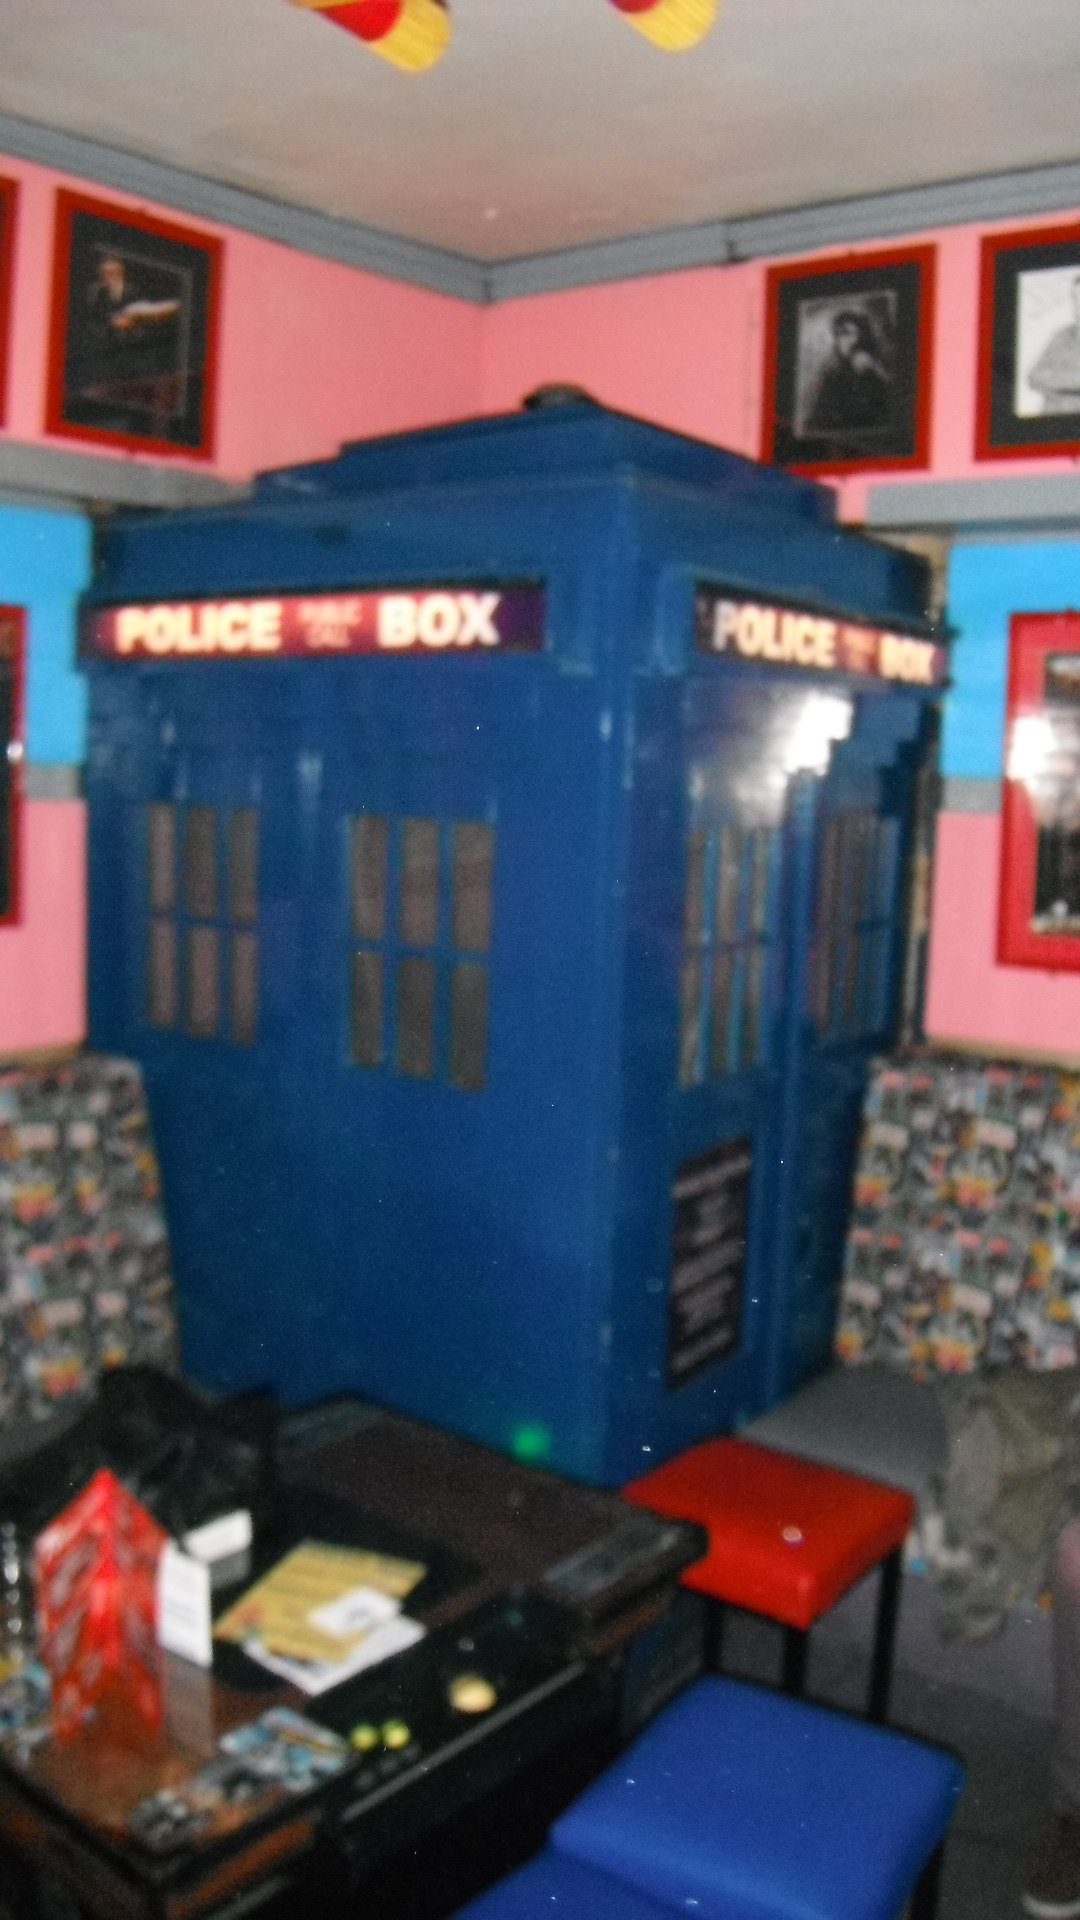 The Doctor Who TARDIS taken by me 